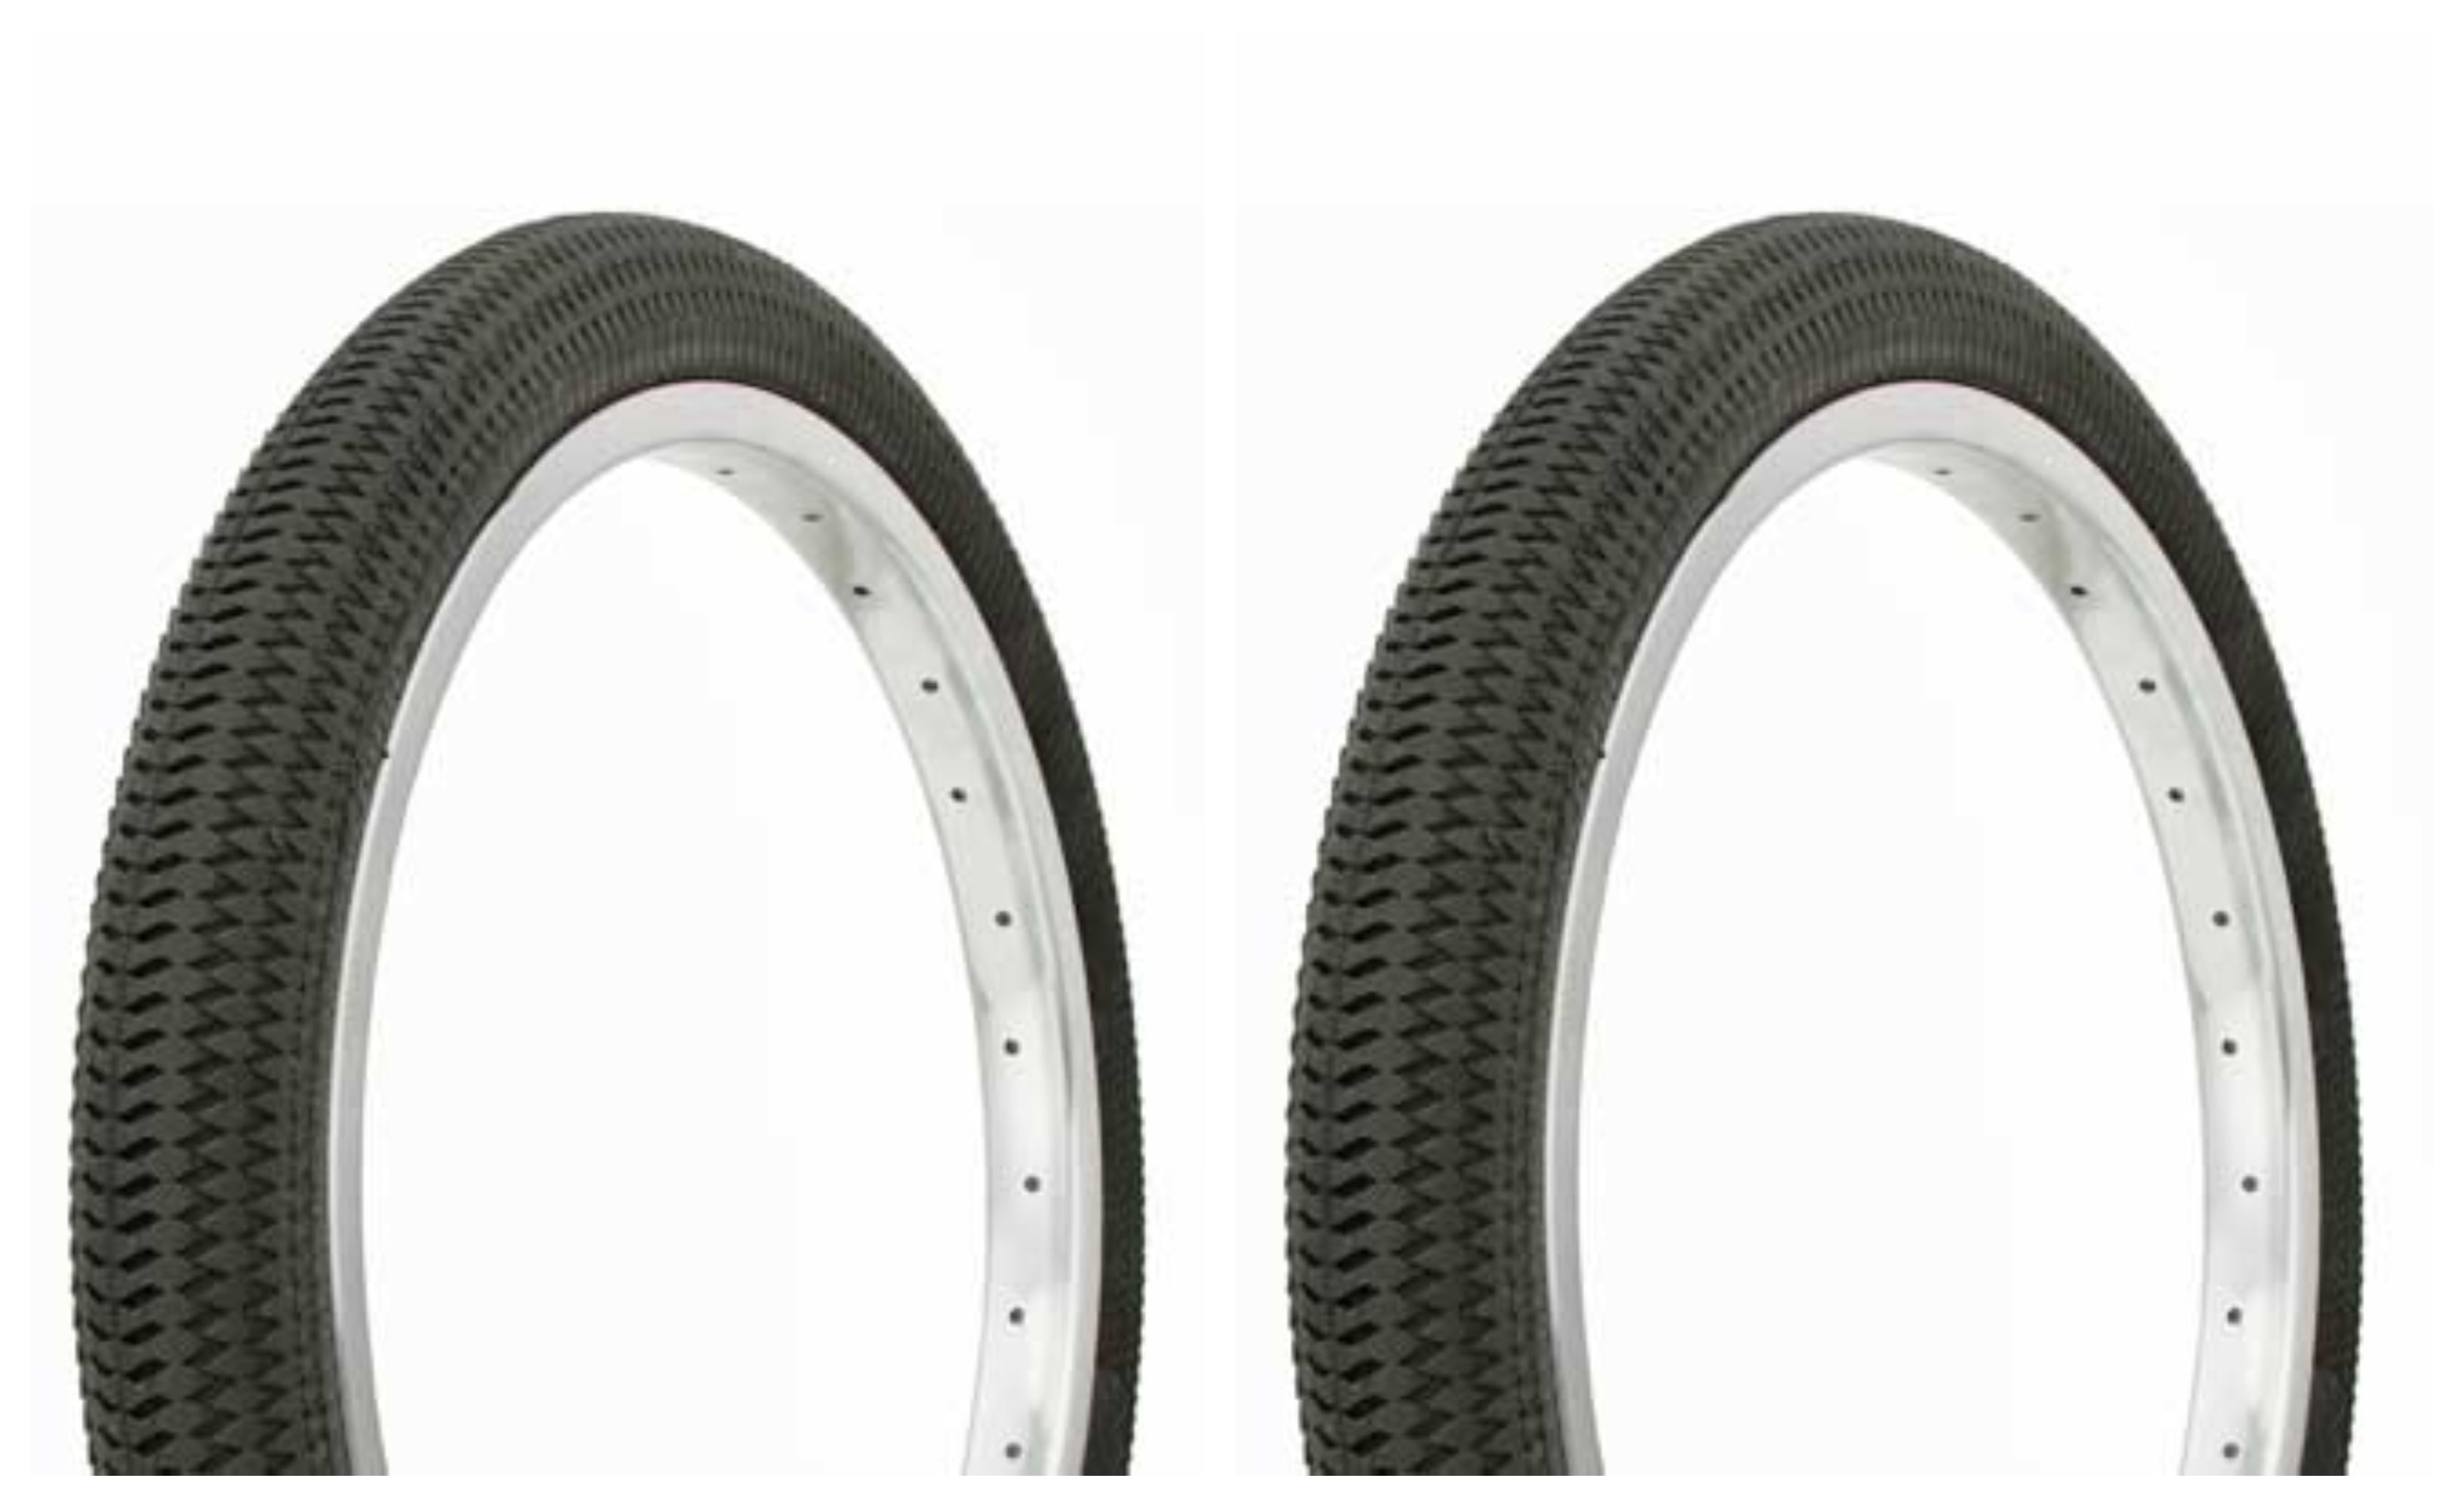 New Kids Bicycle Tires and Tubes 18 x 2.125 Fits 1.75 1.95 Black BMX 18" Bike 